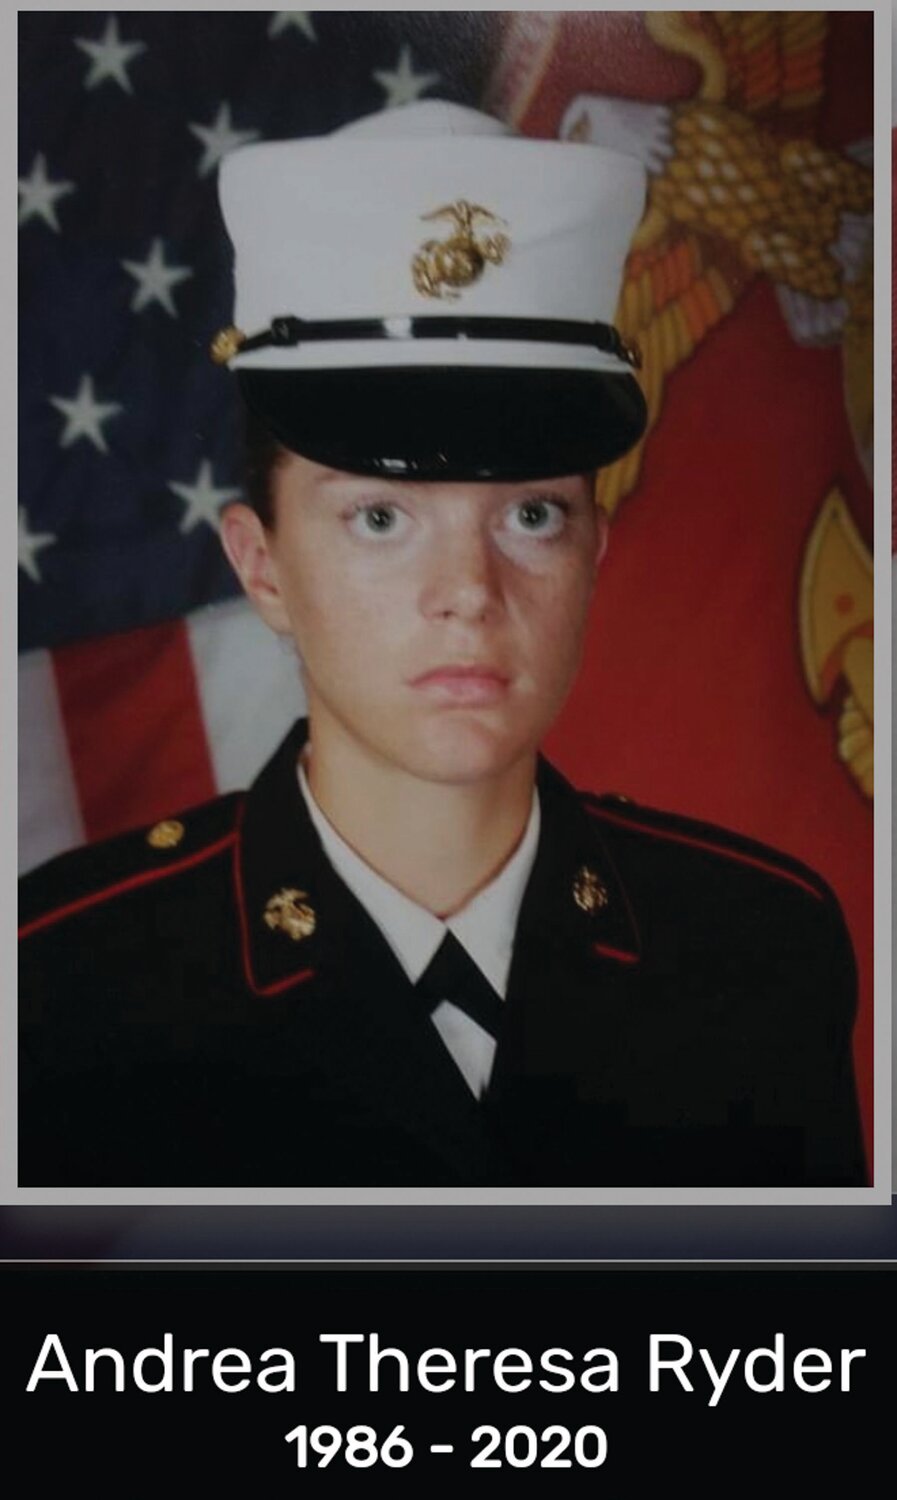 IN HER HONOR: Woonsocket Home for Veterans has been reopened in honor of Marine Corporal Andrea T. Ryder who died in 2020 at the age of 34 from service-connected cancer.